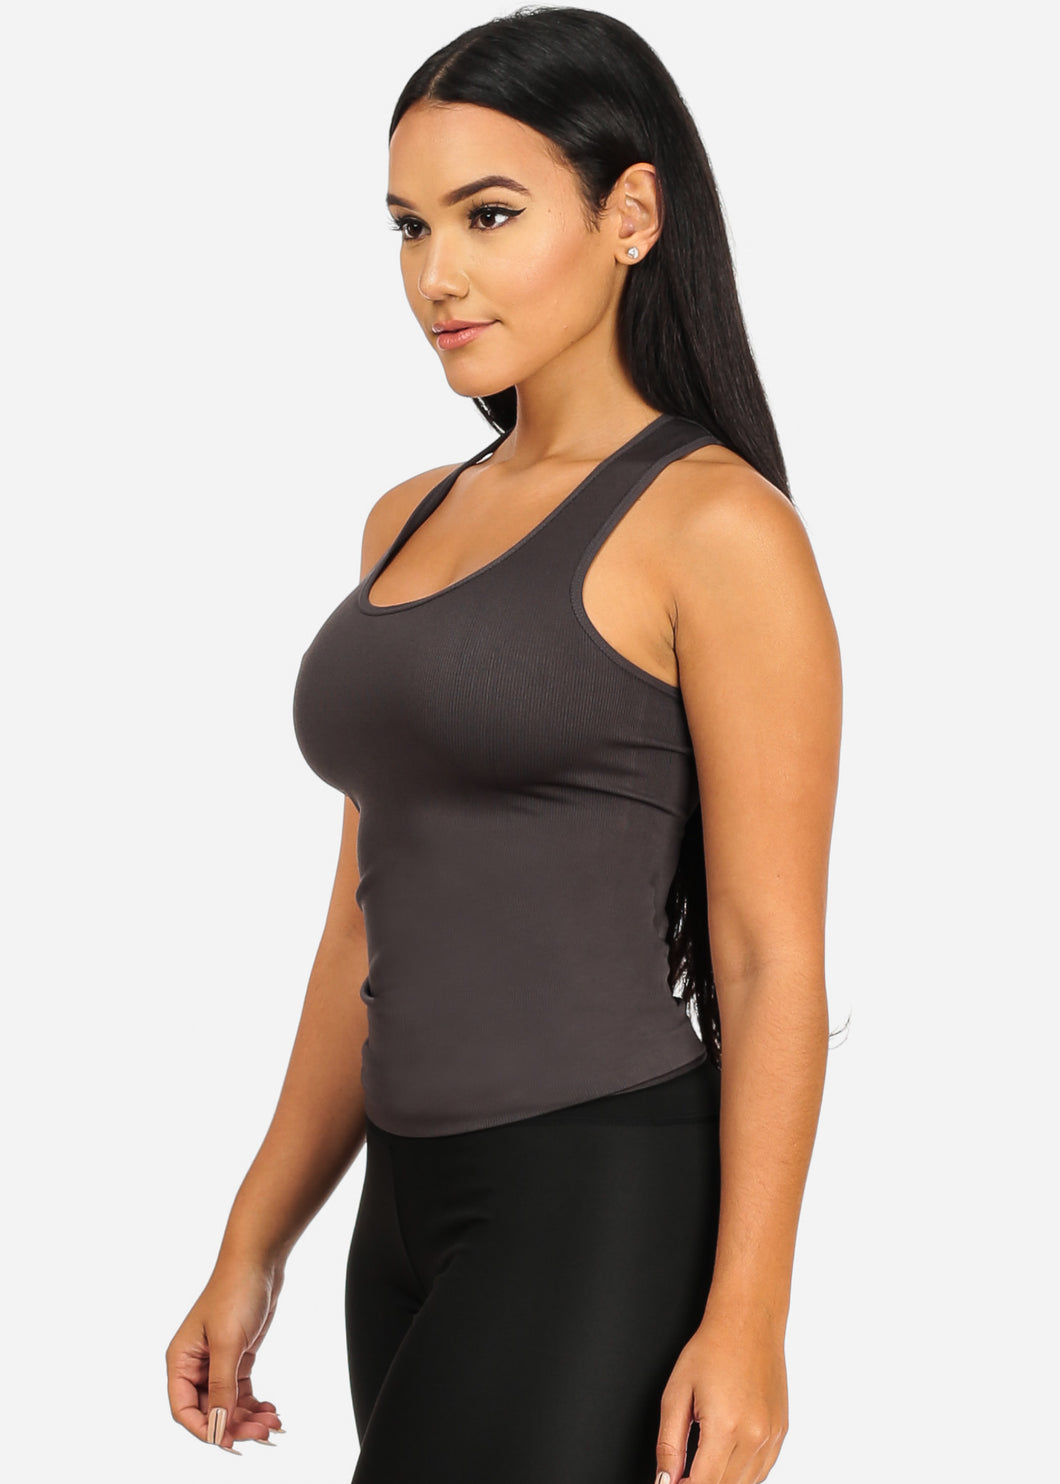 Women's Solid Color Seamless Tank Top. • Round Neckline • Body-con •  Sleeveless • Fitted • Solid Color • Super Soft • Stretchy - One size fits  most 0-14 - Approximately 22 L - 92% Nylon, 8% Spandex, 7306850